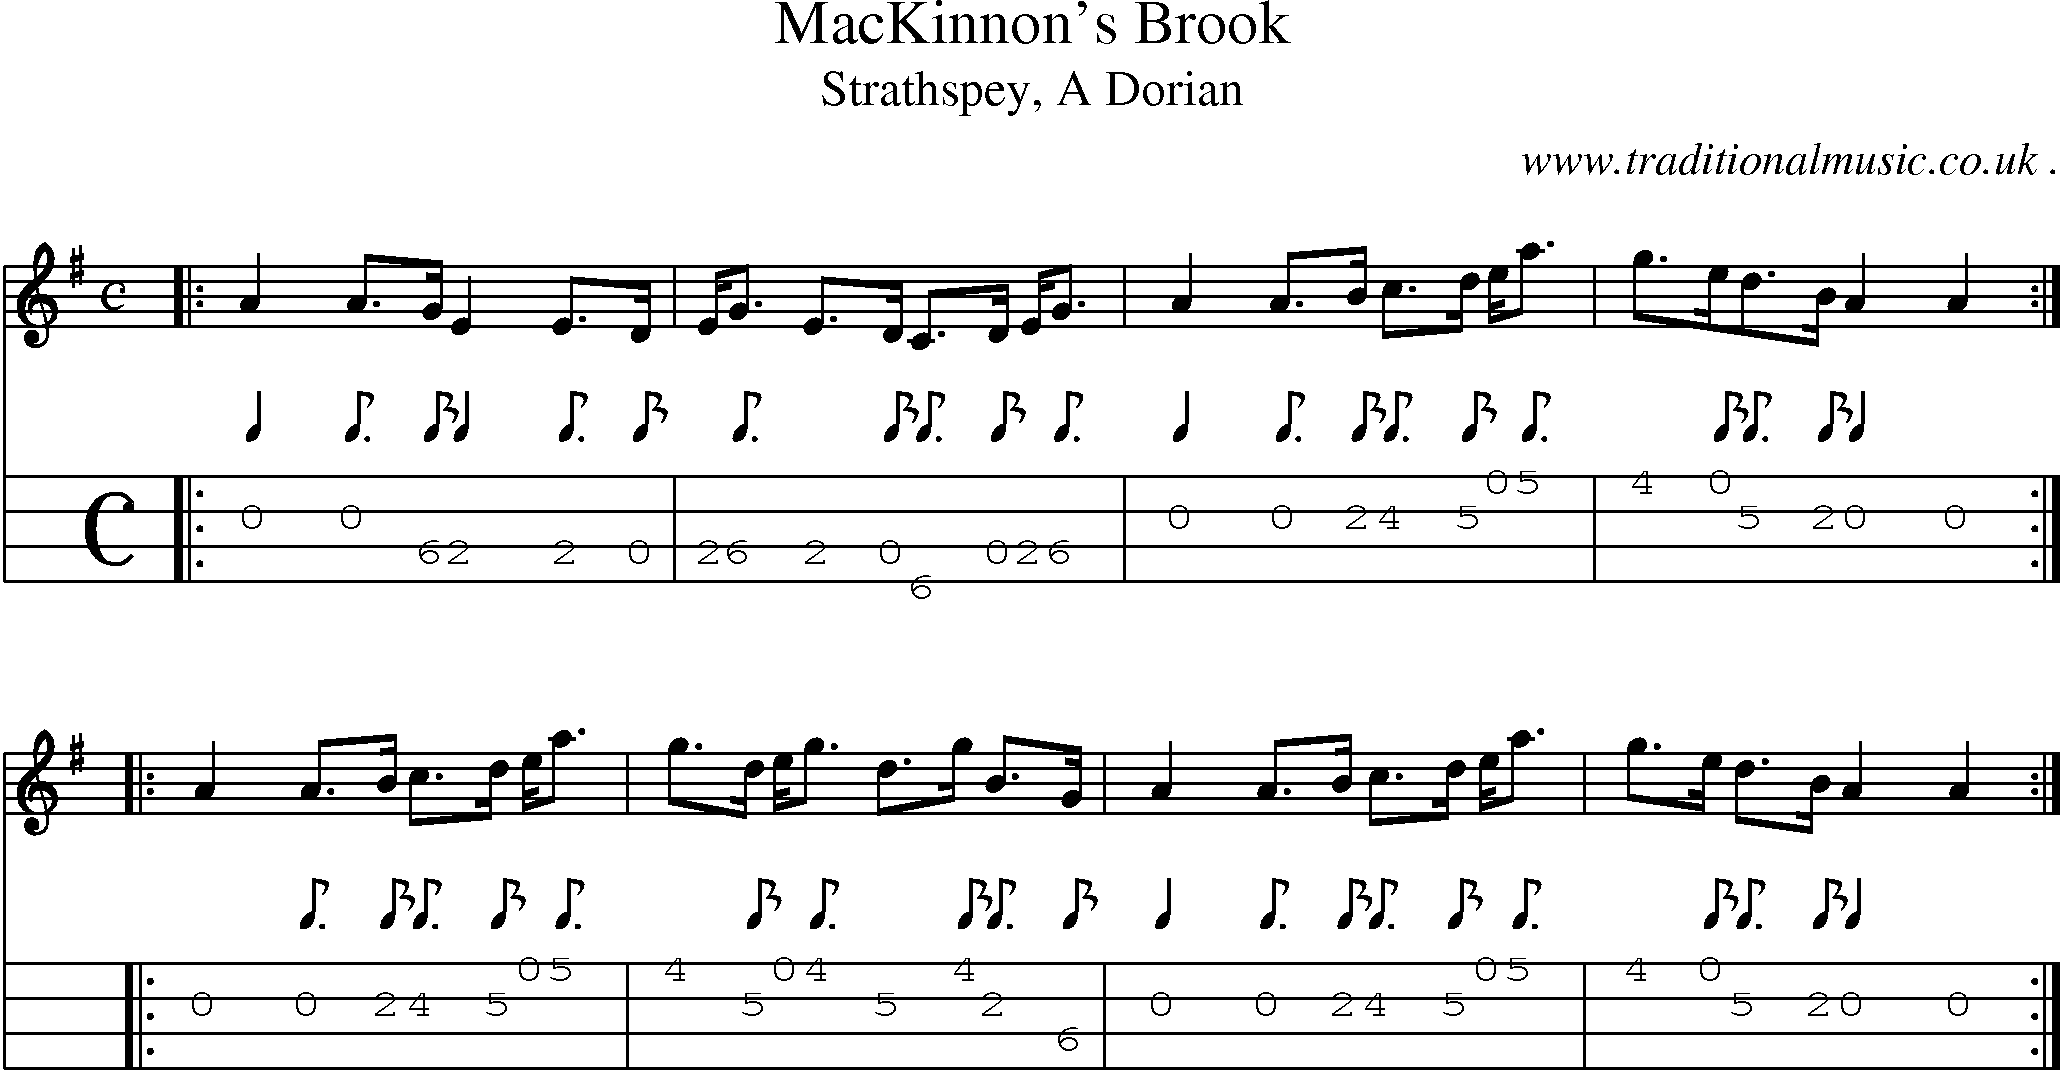 Sheet-music  score, Chords and Mandolin Tabs for Mackinnons Brook